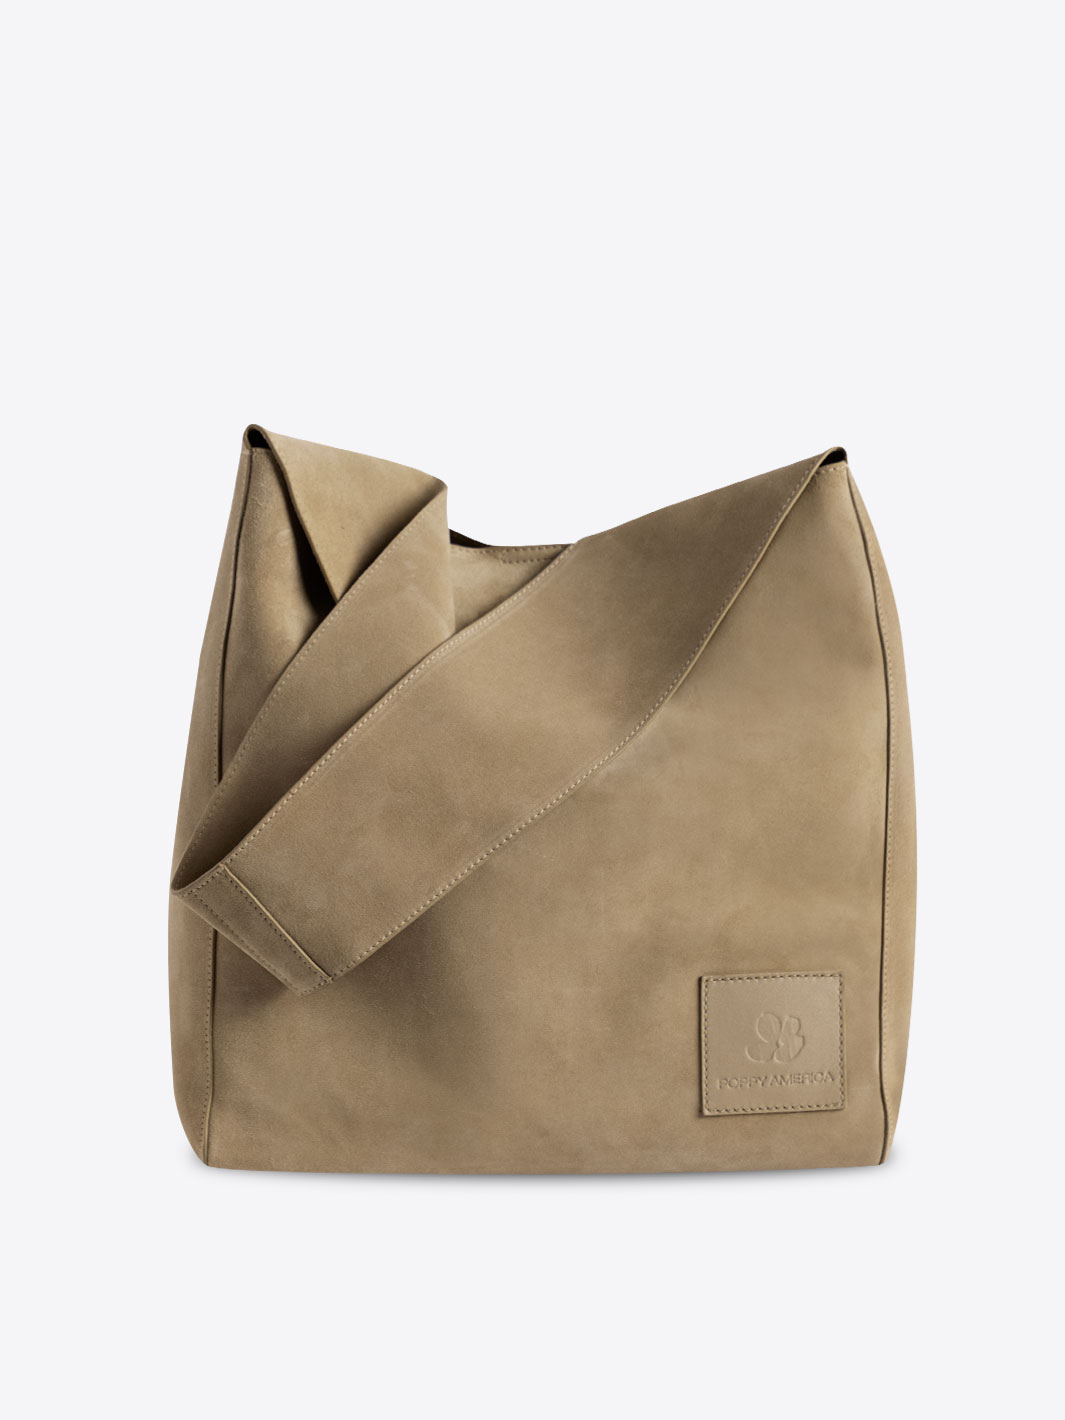 Luxury Tote Bag Suede | Chocolate